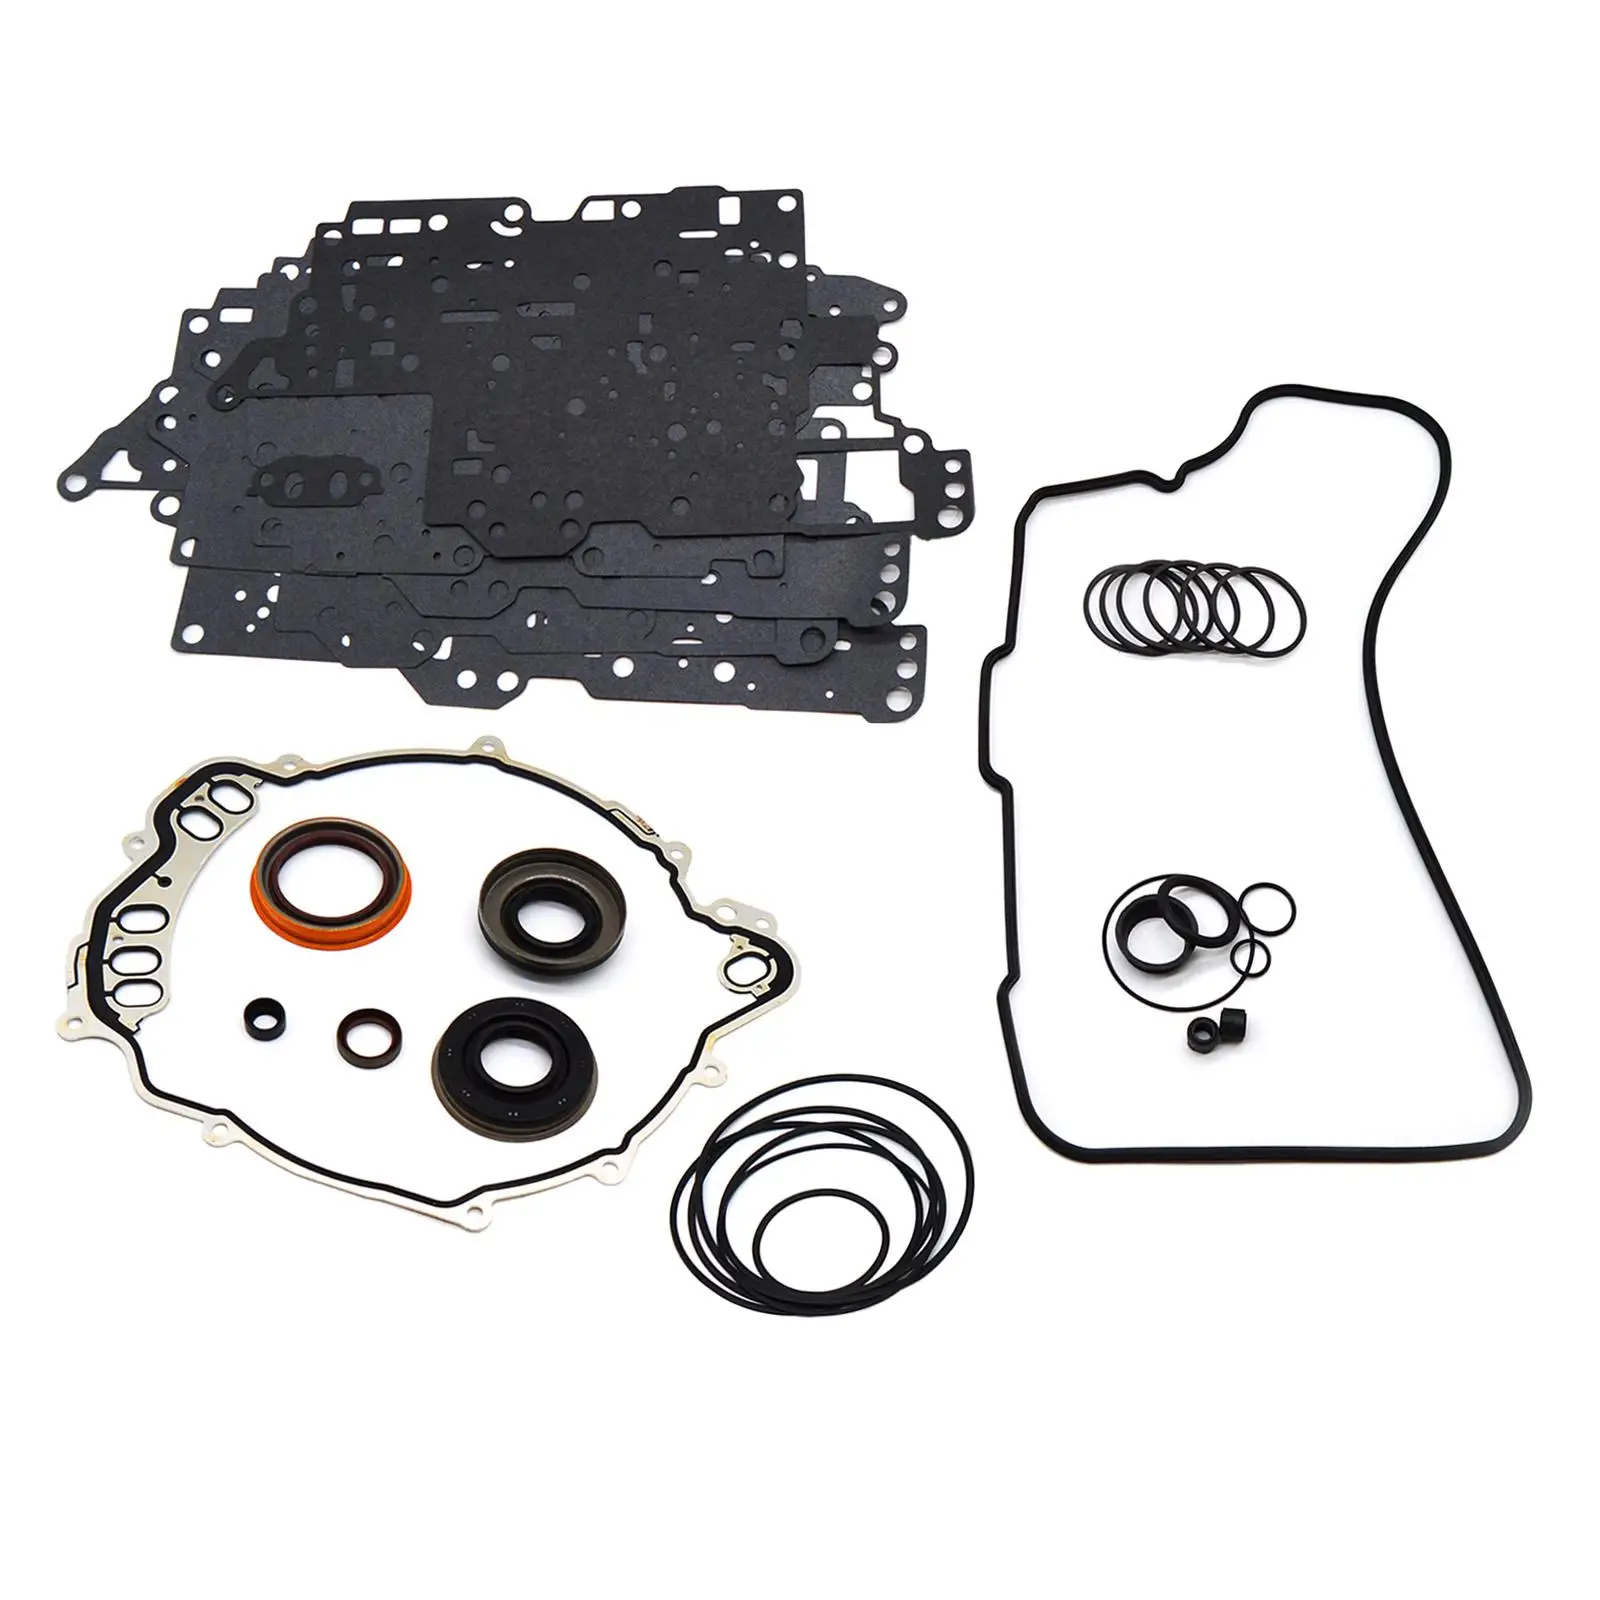 6T70 6T75 Auto Transmission Master Rebuild Kit Easy Installation Rubber Minor Repair Kit for Enclave 3.0 T19600A Auto Parts